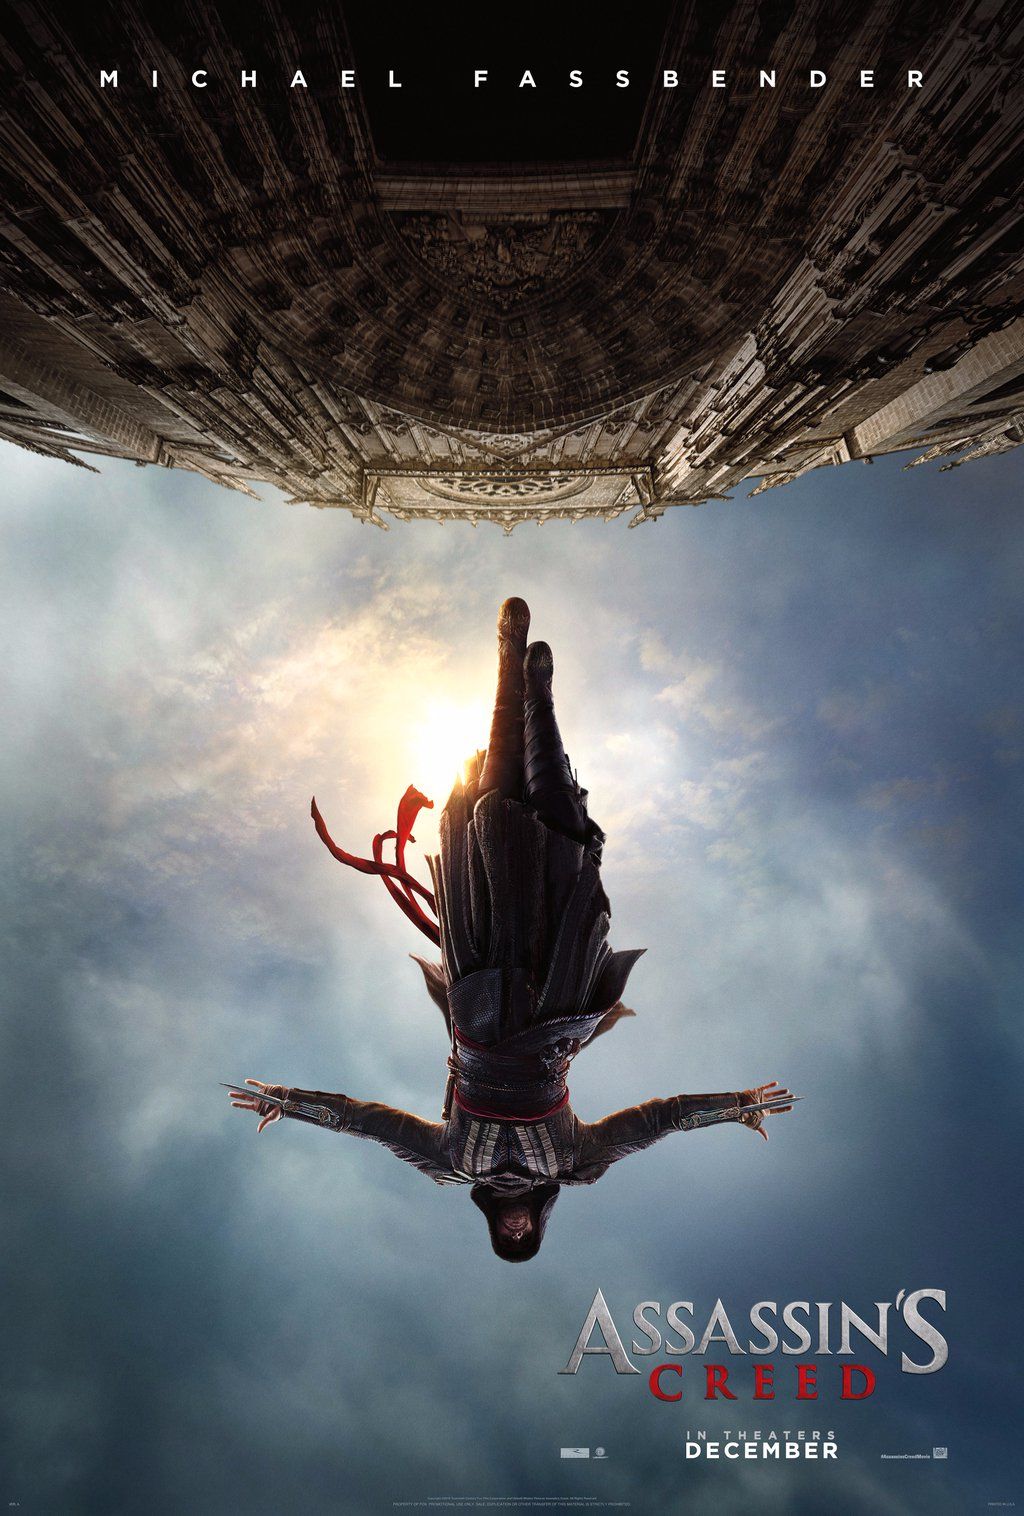 Assassin’s Creed Movie Trailer Released